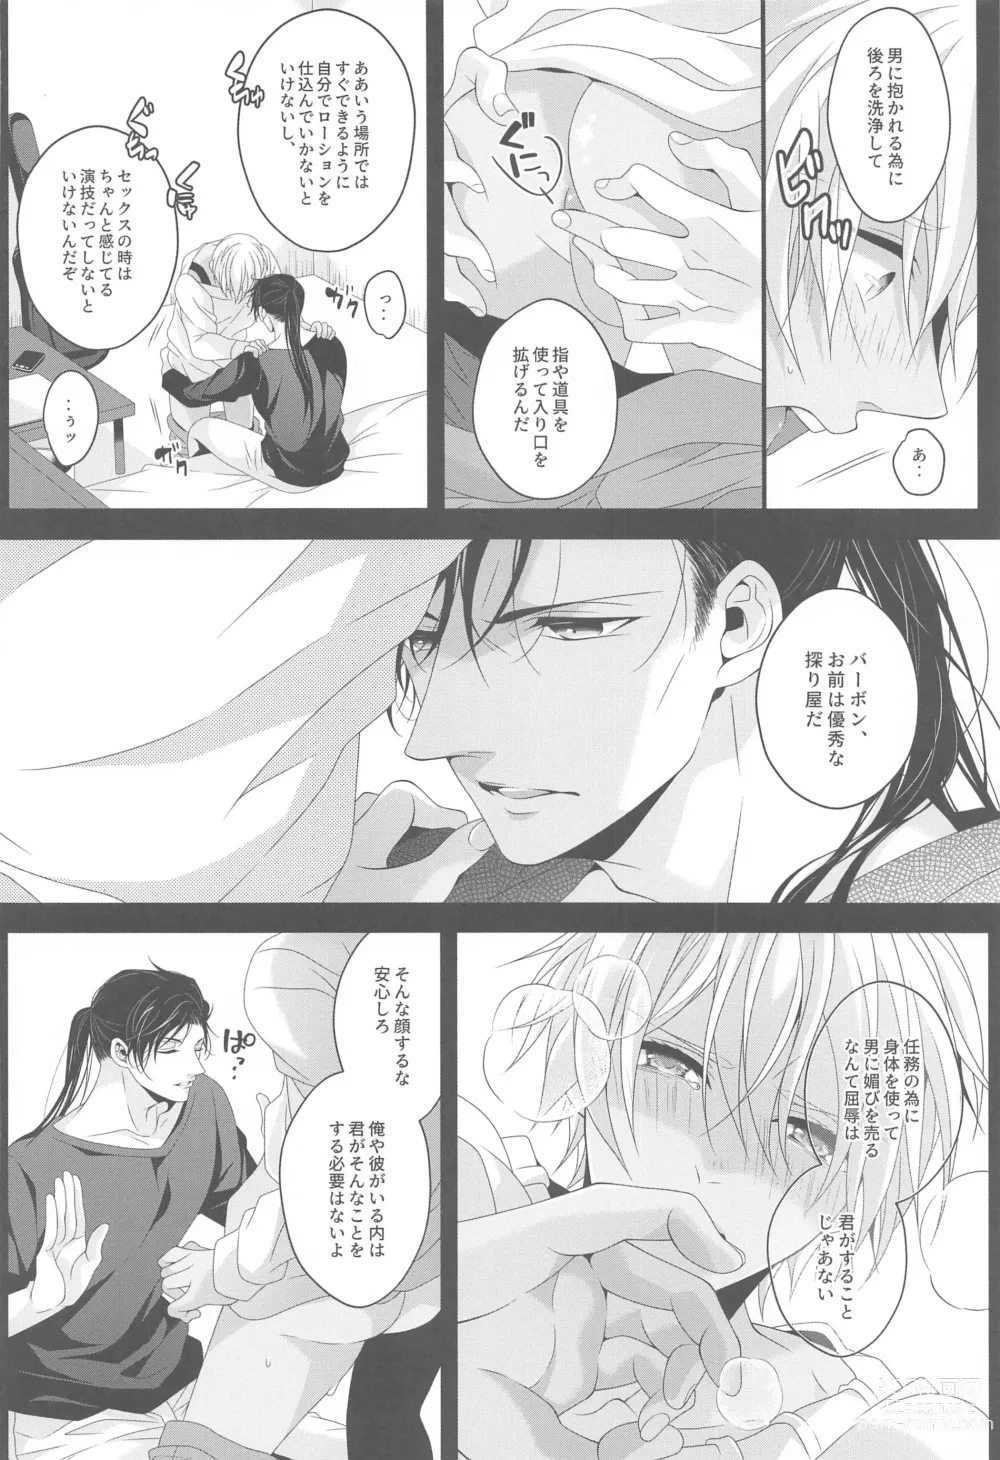 Page 13 of doujinshi Aibetsuriku no Yosame - A rainy night the pain of separation from loved ones